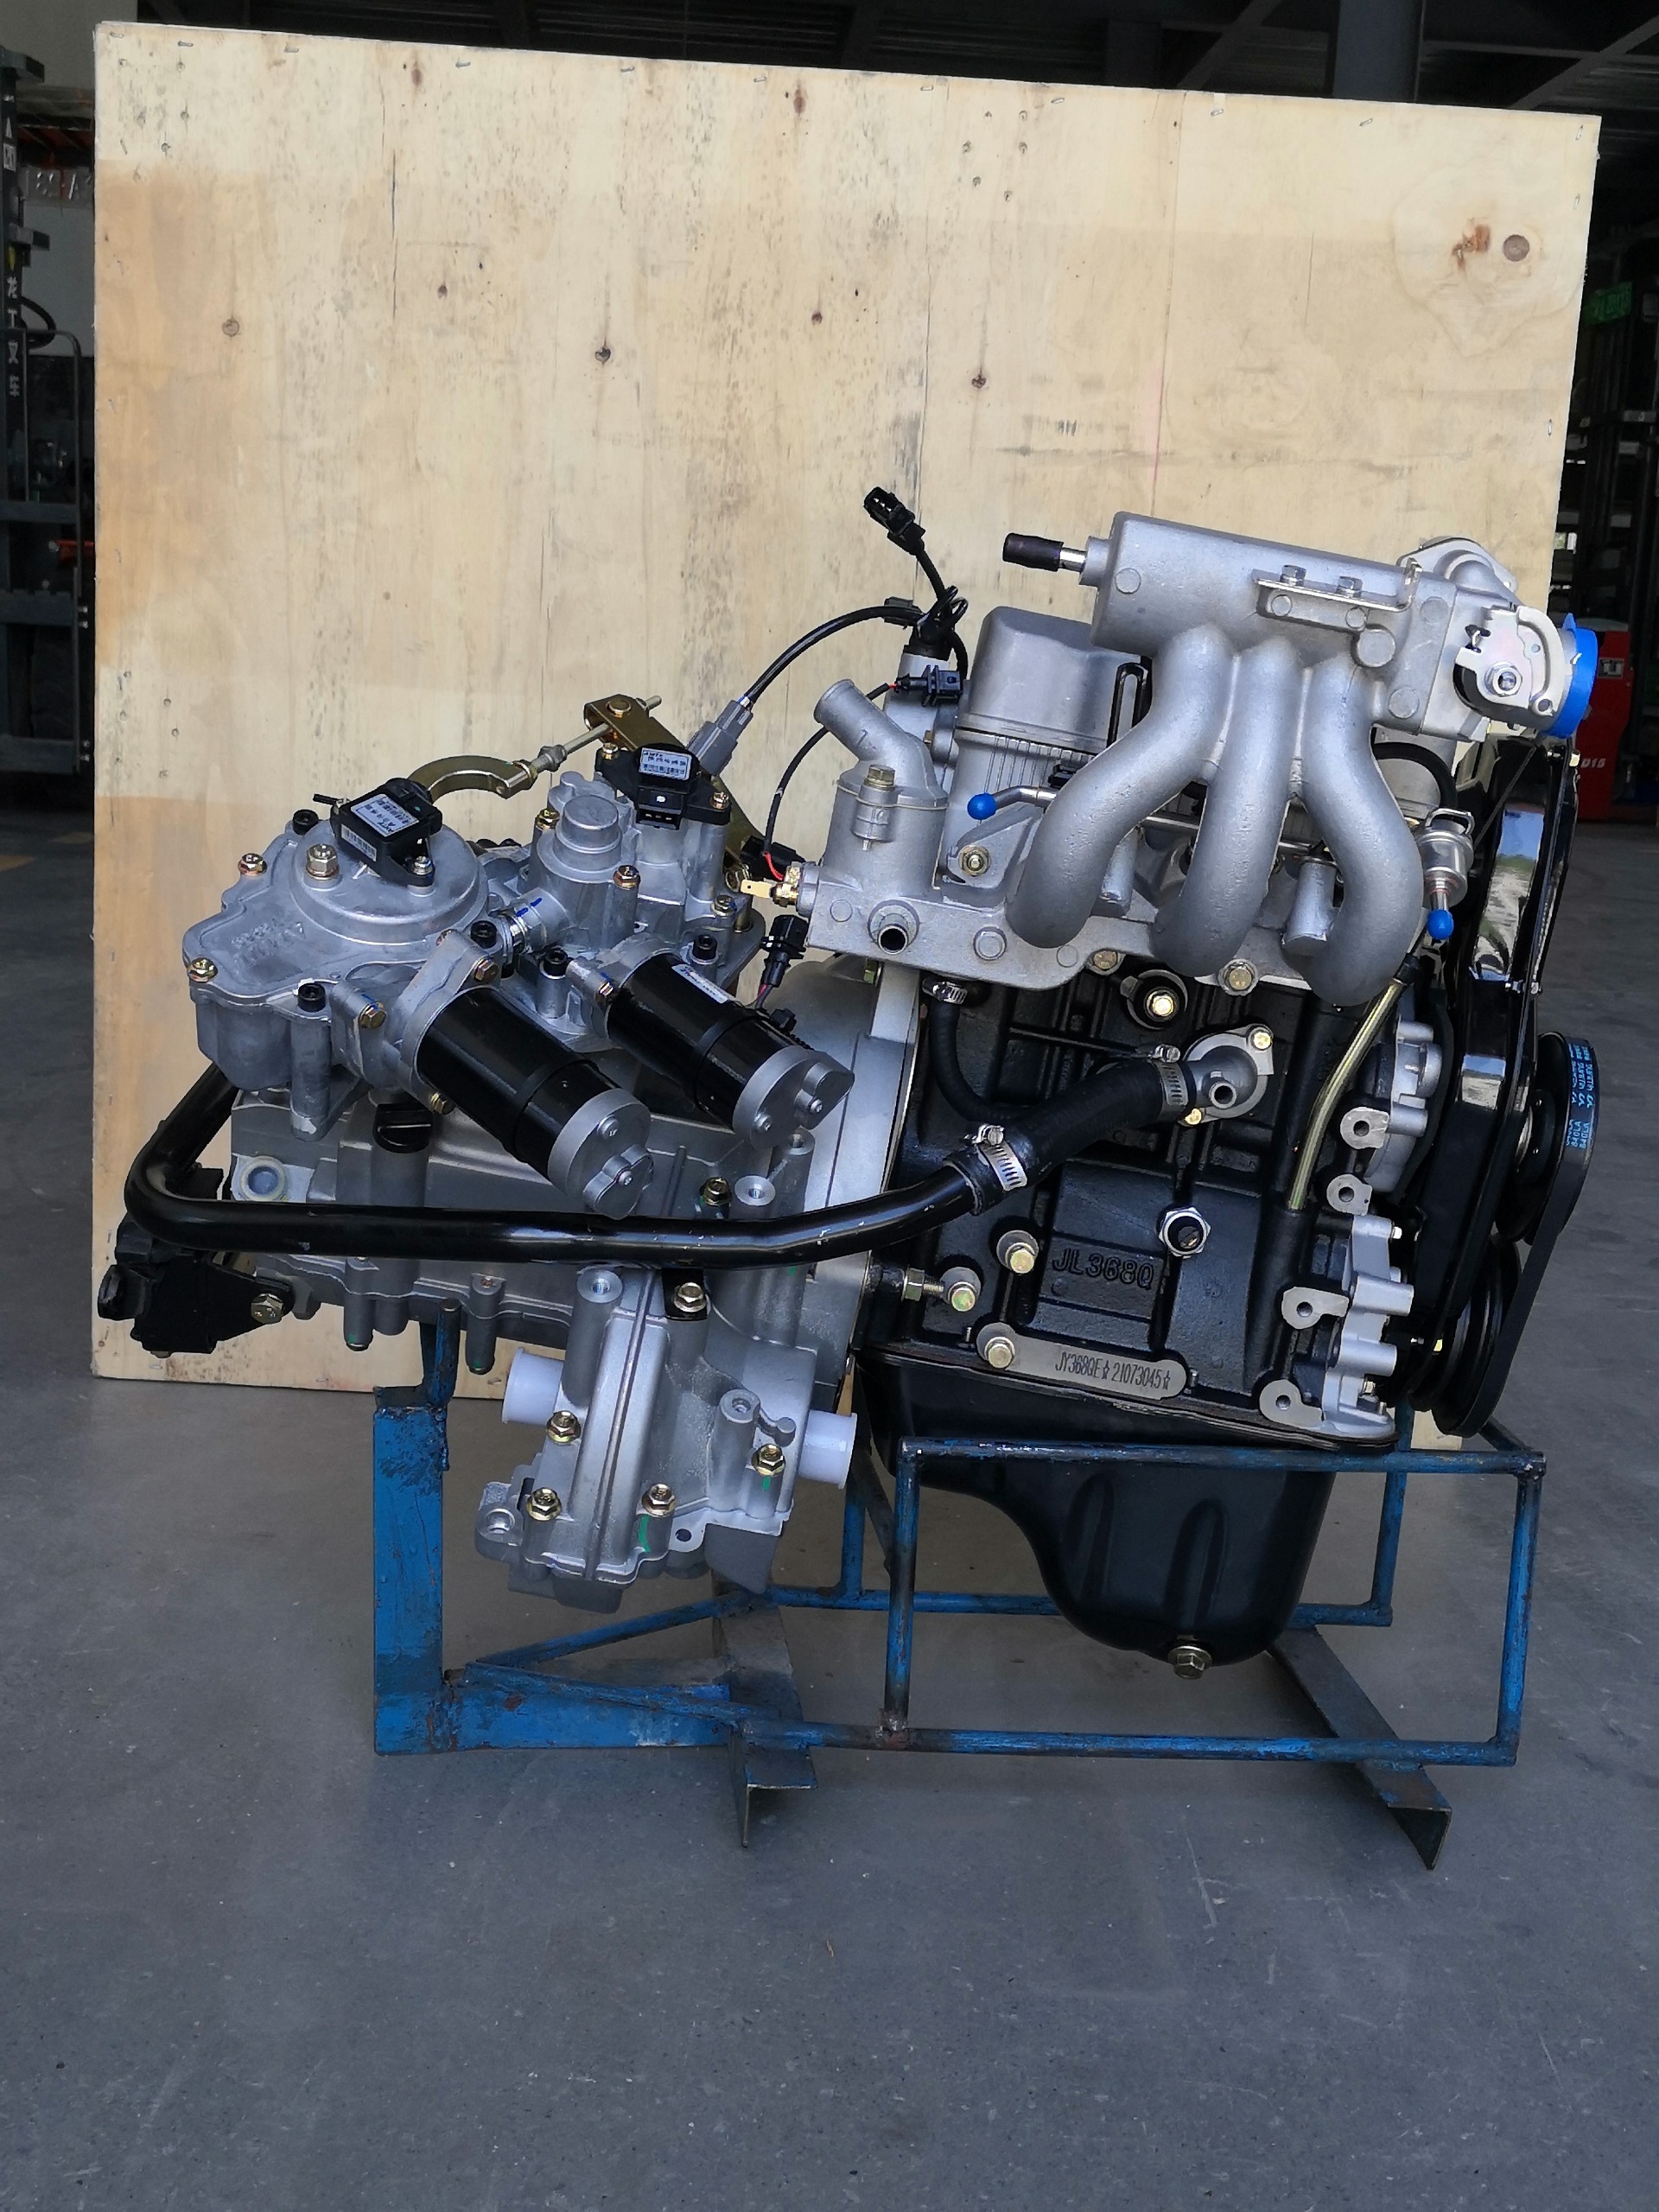 DAYANG Gasoline type Car Engine 465qe 800cc water cooled Engine Assembly Fit For adult Origin Land Word